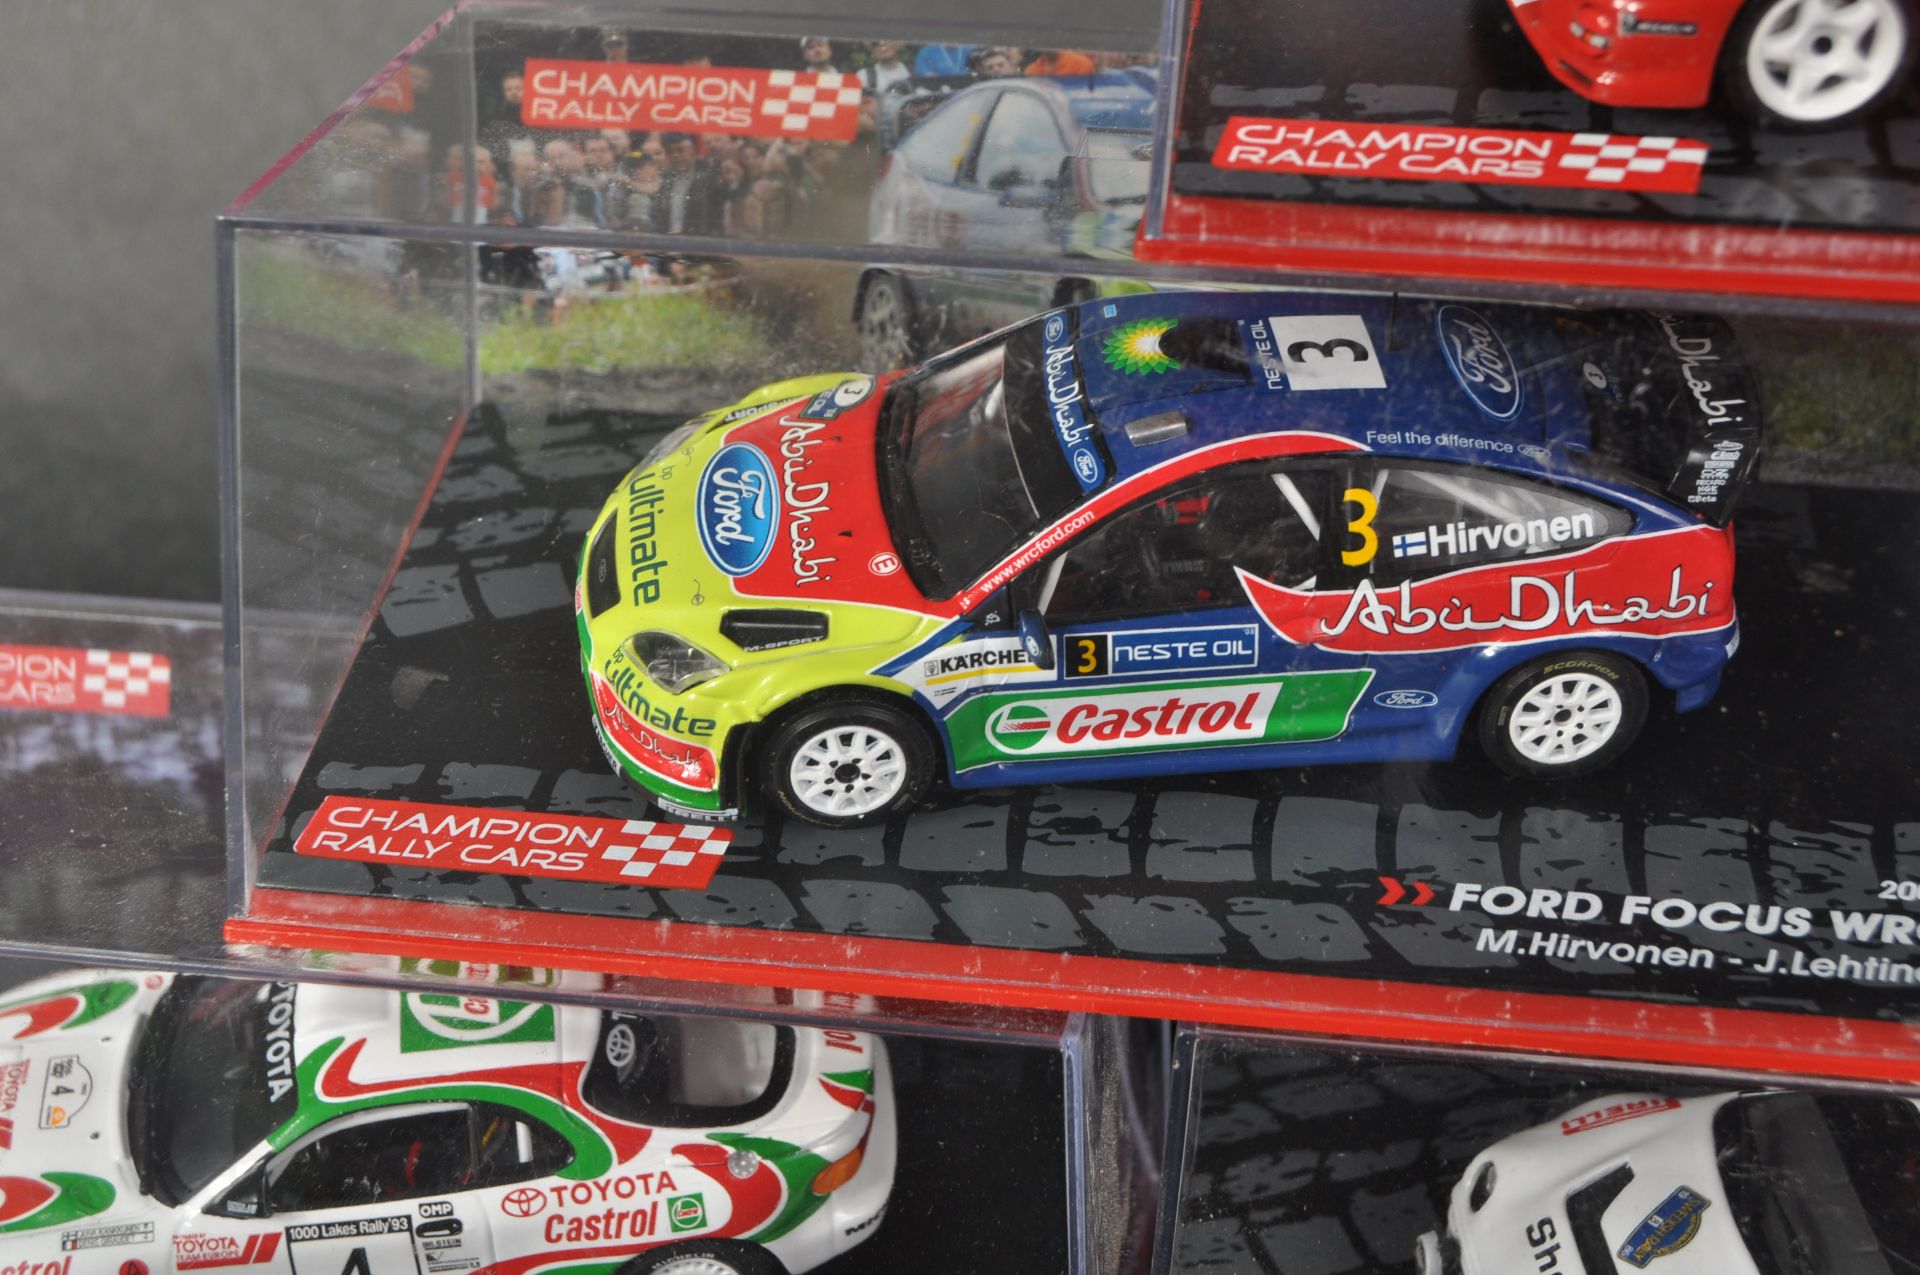 CHAMPION RALLY CARS - 1/43 SCALE PRECISION DIECAST MODELS - Image 3 of 7